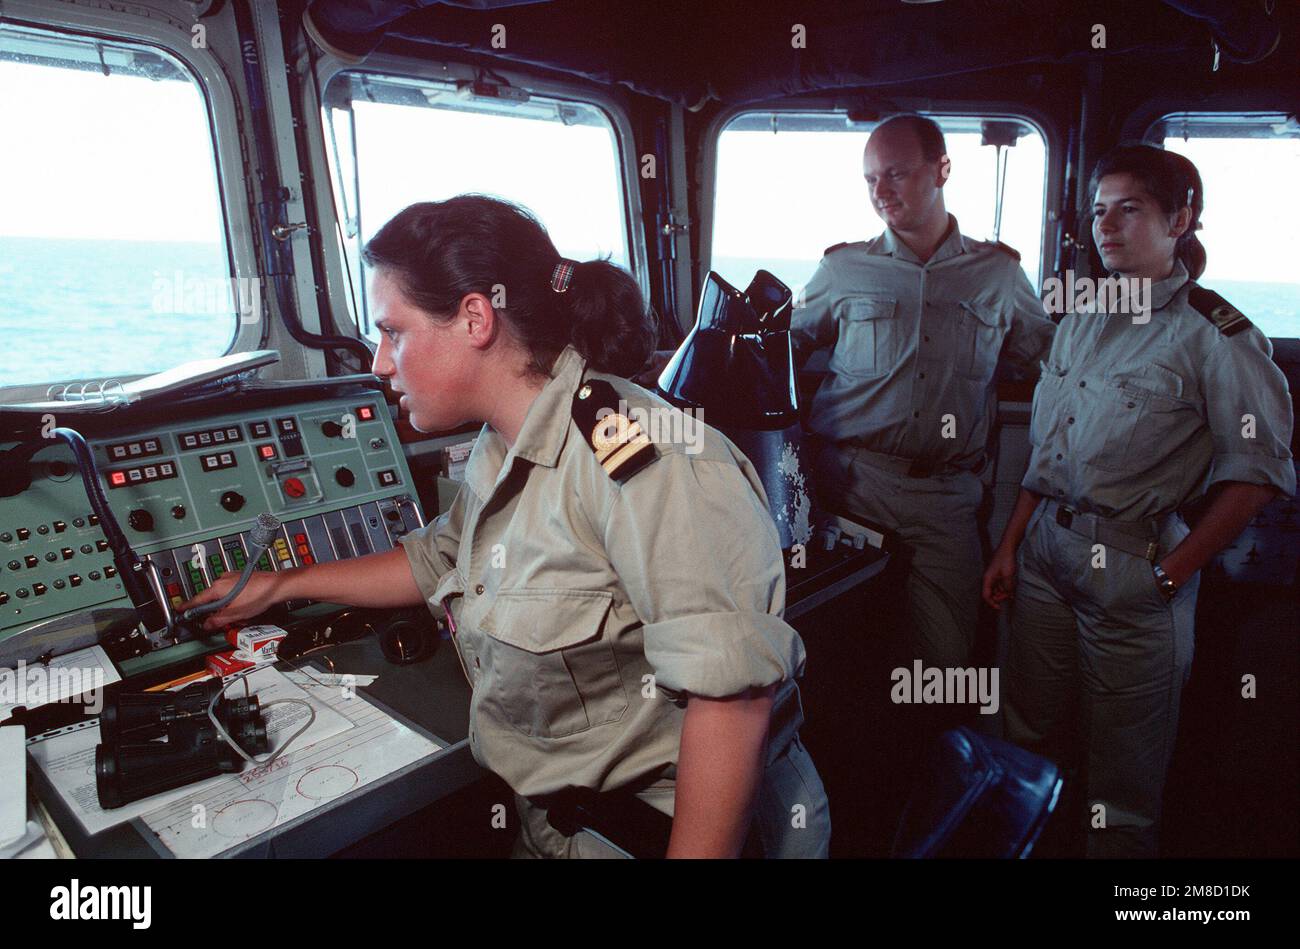 LT Trommelen, officer of the watch, monitors equipment on the bridge of the Dutch navy frigate HR MS CALLENBURGH (F-808) as other officers stand by during Fleet Ex 1-90. Subject Operation/Series: FLEET EX 1-90 Base: Hr Ms Callenburgh (F-808) Country: Atlantic Ocean (AOC) Stock Photo